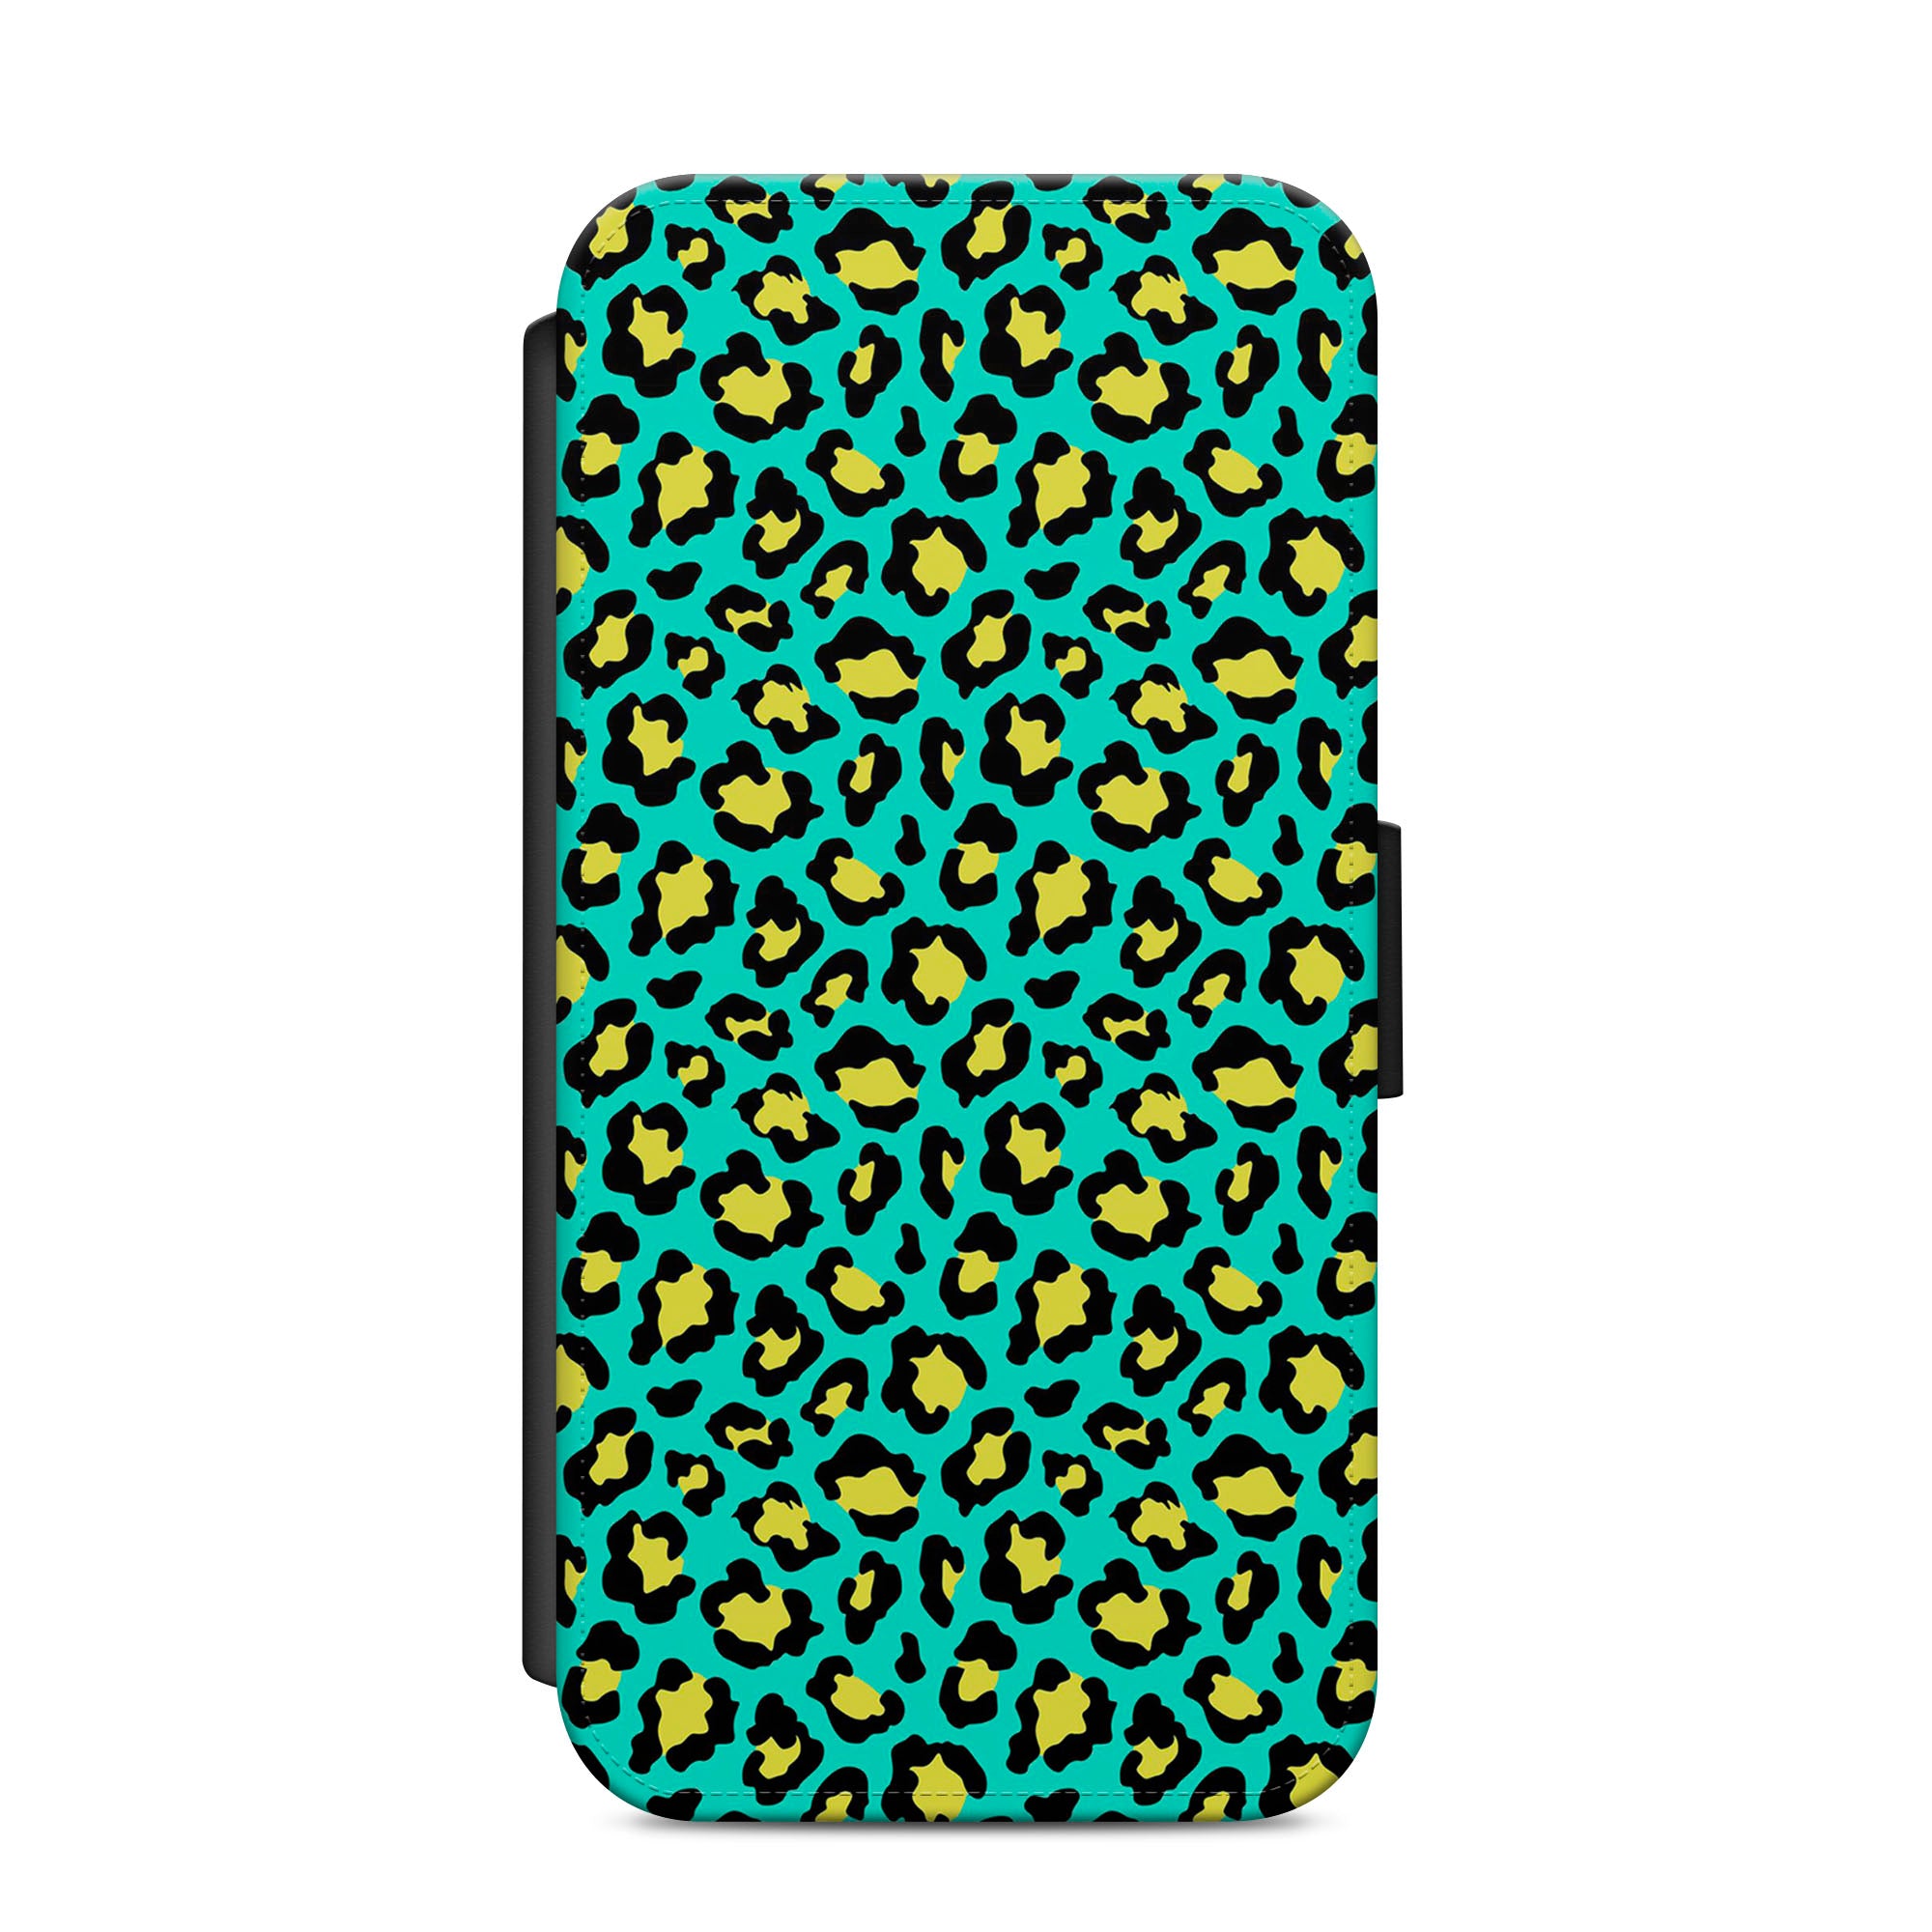 Green & Yellow Leopard Print Faux Leather Flip Case Wallet for iPhone / Samsung